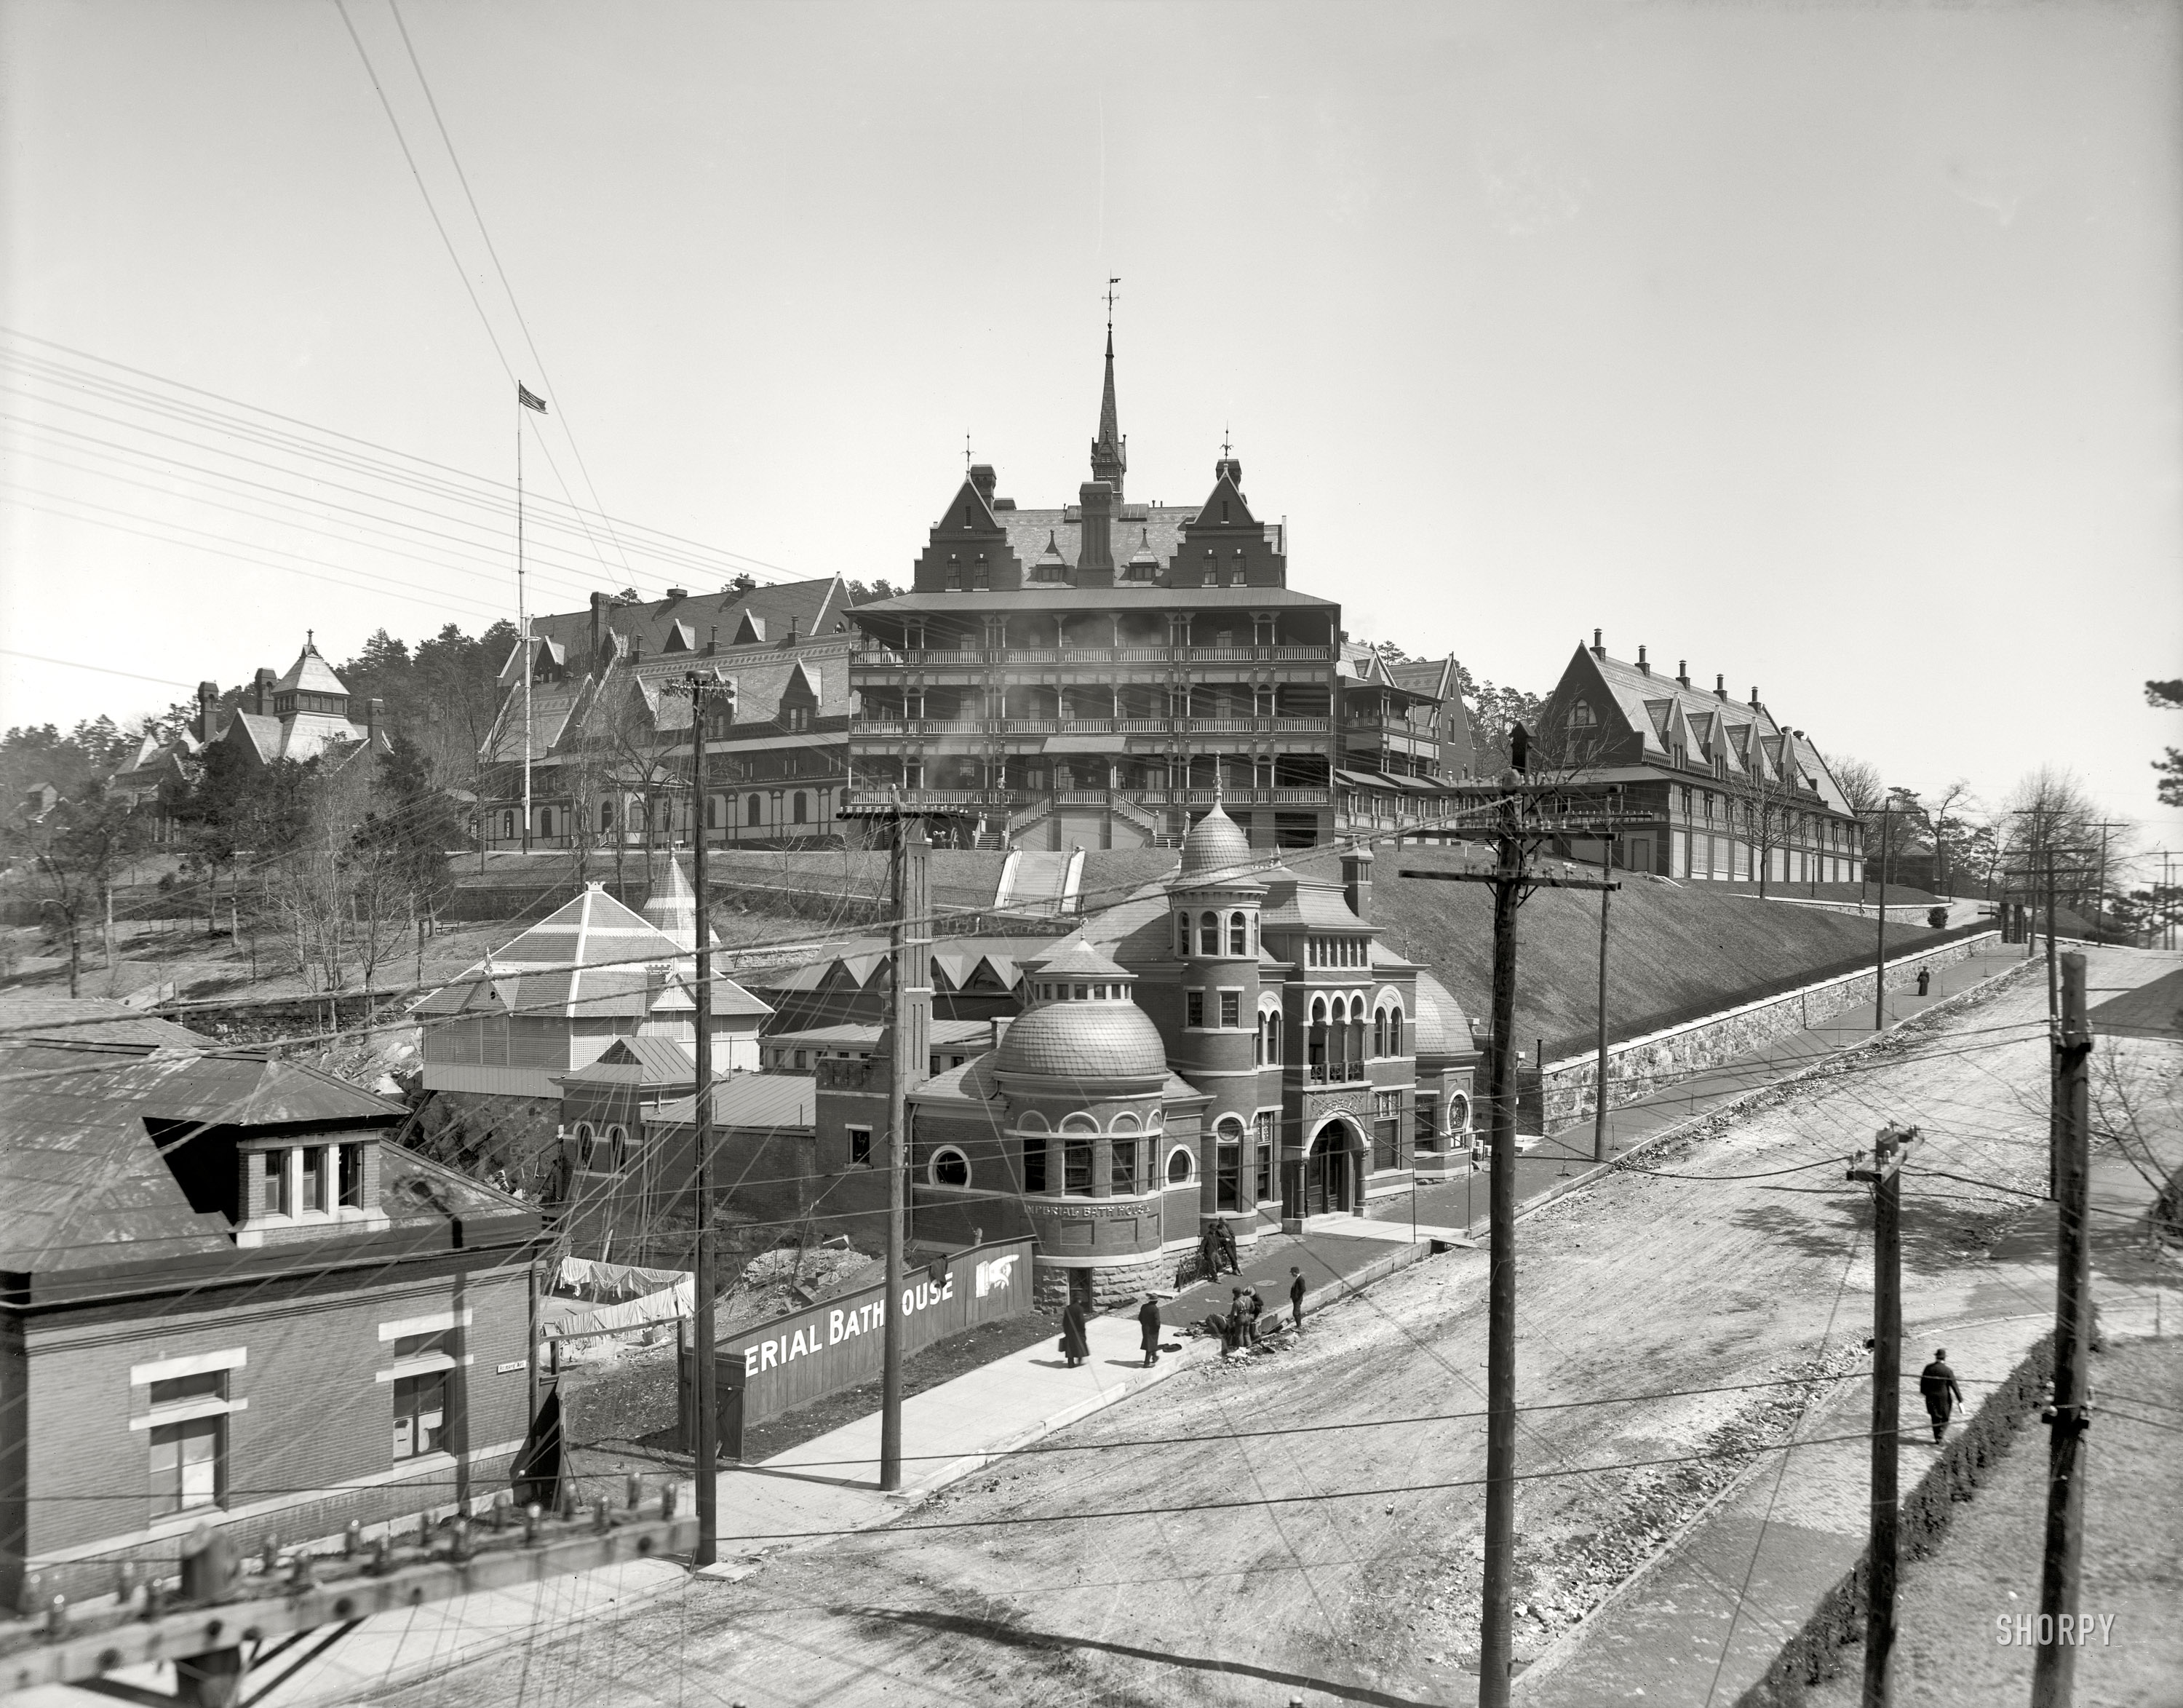 Hot Springs, Arkansas, circa 1908. "Army and Navy General Hospital." Closer to the camera on Reserve Avenue we have the Imperial Bath House and some helpful signage. 8x10 inch glass negative, Detroit Publishing Company. View full size.